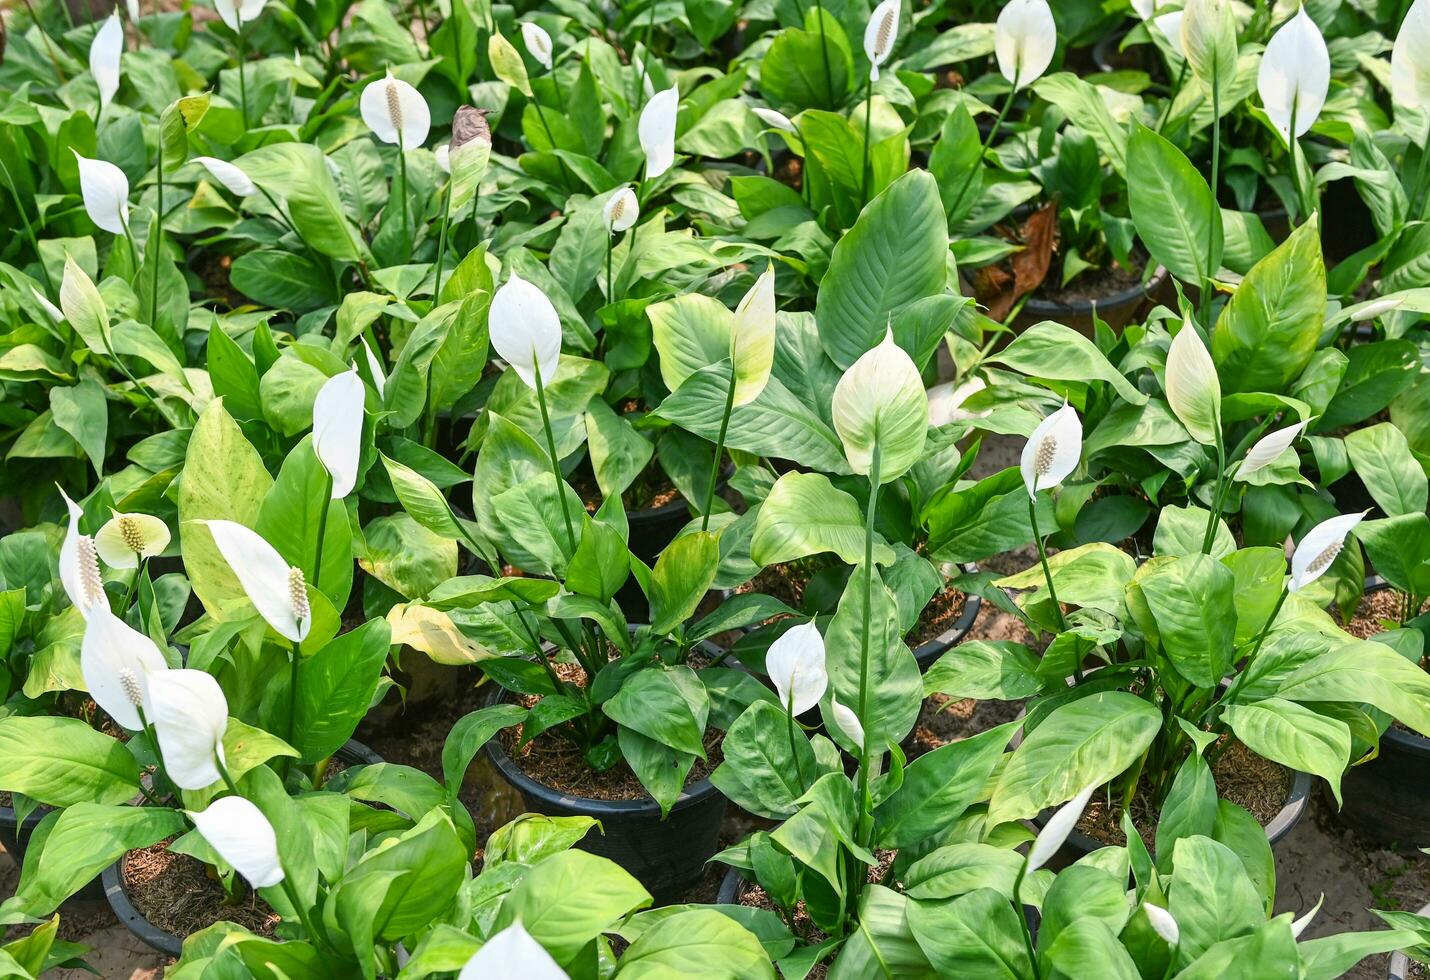 Peace lily seedling bag in the garden for planting for decorative houseplant spathiphyllum wallisii commonly known as peace lily tree ornamental plant reduce carbon and poison absorbing tree photo